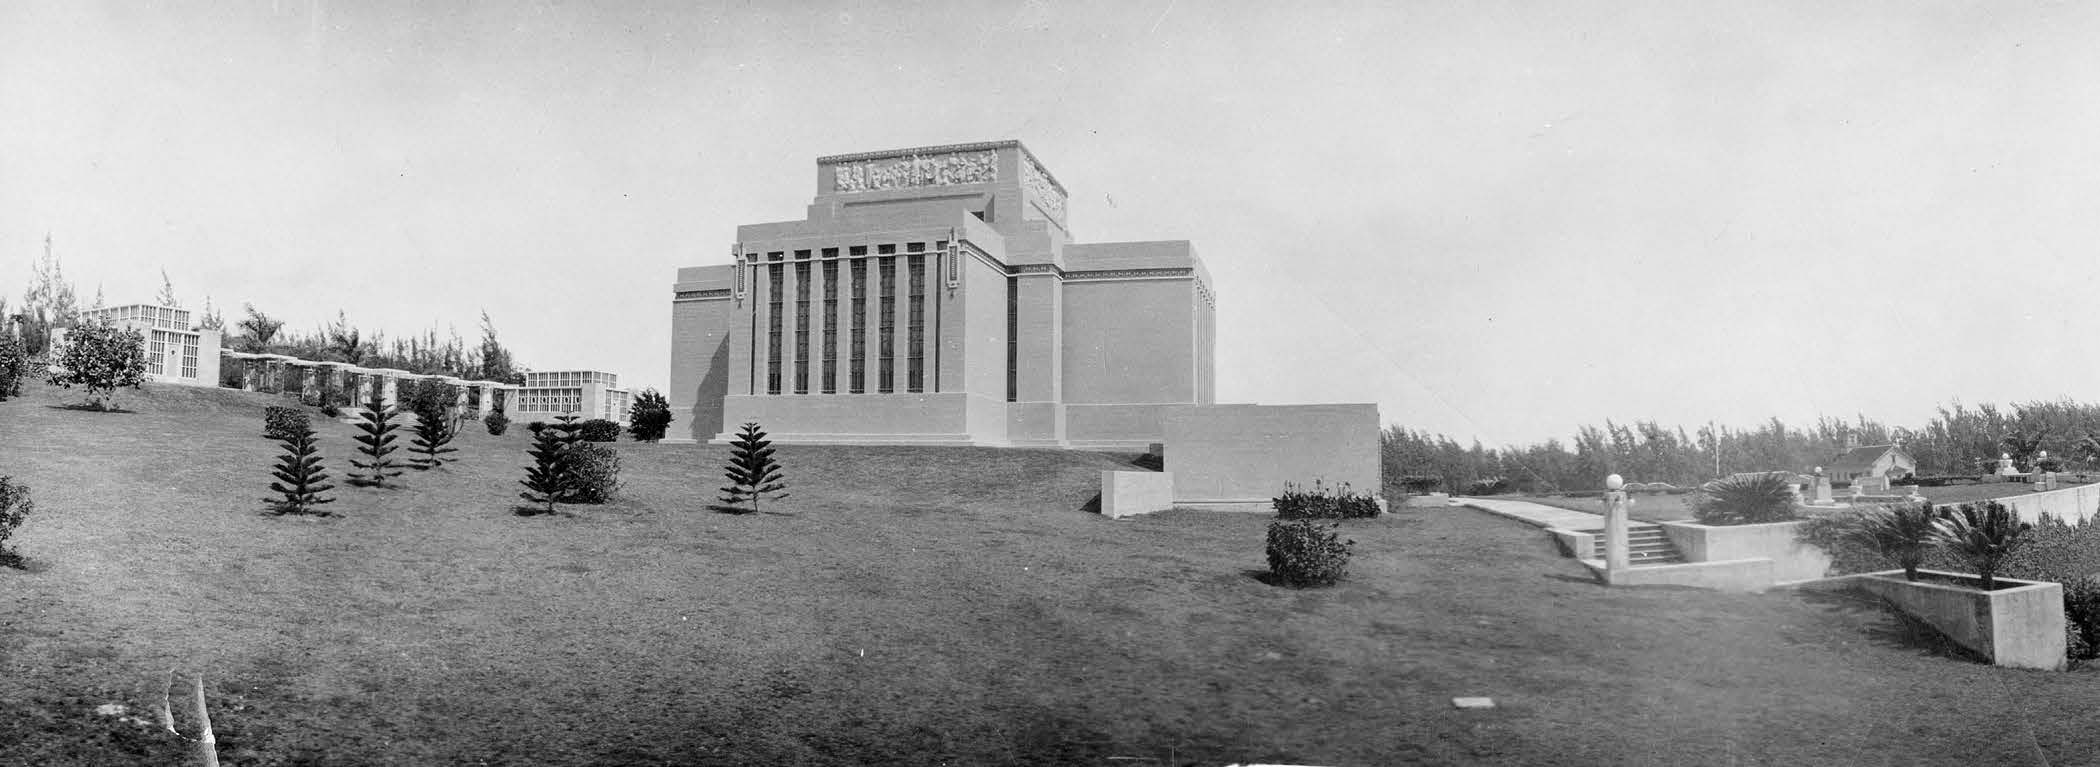 South side view of the Laie Hawaii Temple. Patrons enter the ground level of the temple from the east side. Then in ascending symbolism they pass from room to room until reaching the celestial room, the pinnacle of the temple. Courtesy of Church History Library.